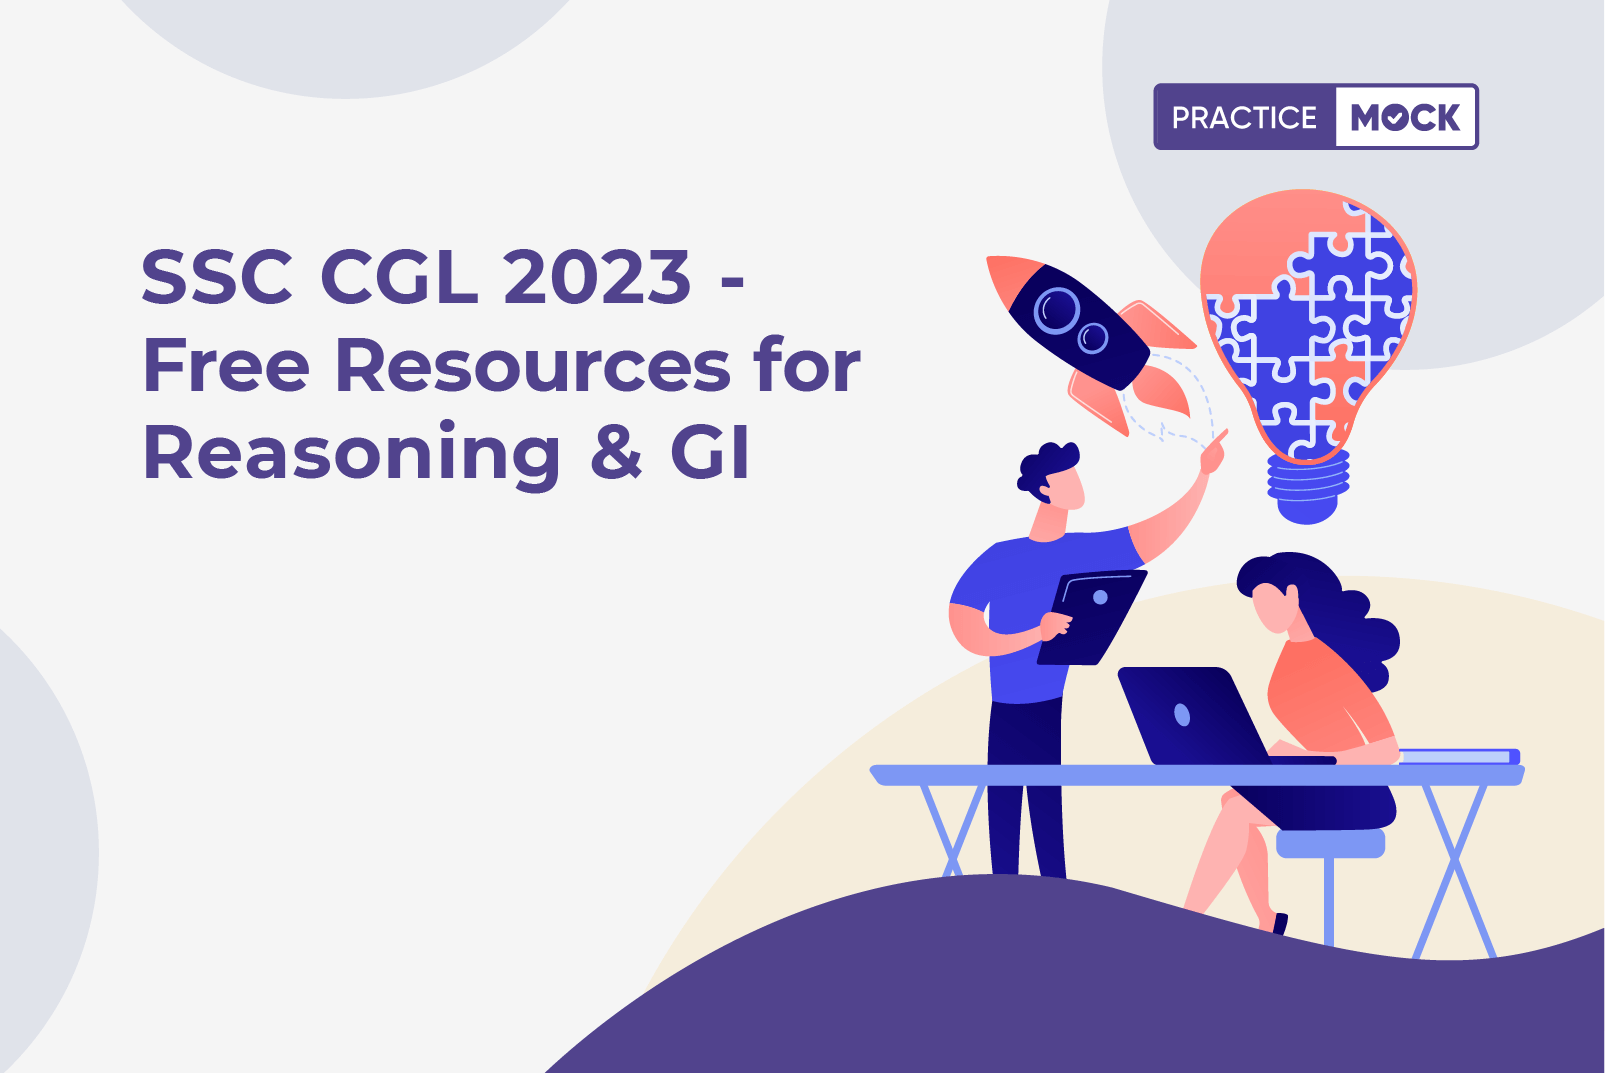 SSC CGL 2023 - Free Resources for Reasoning & GI